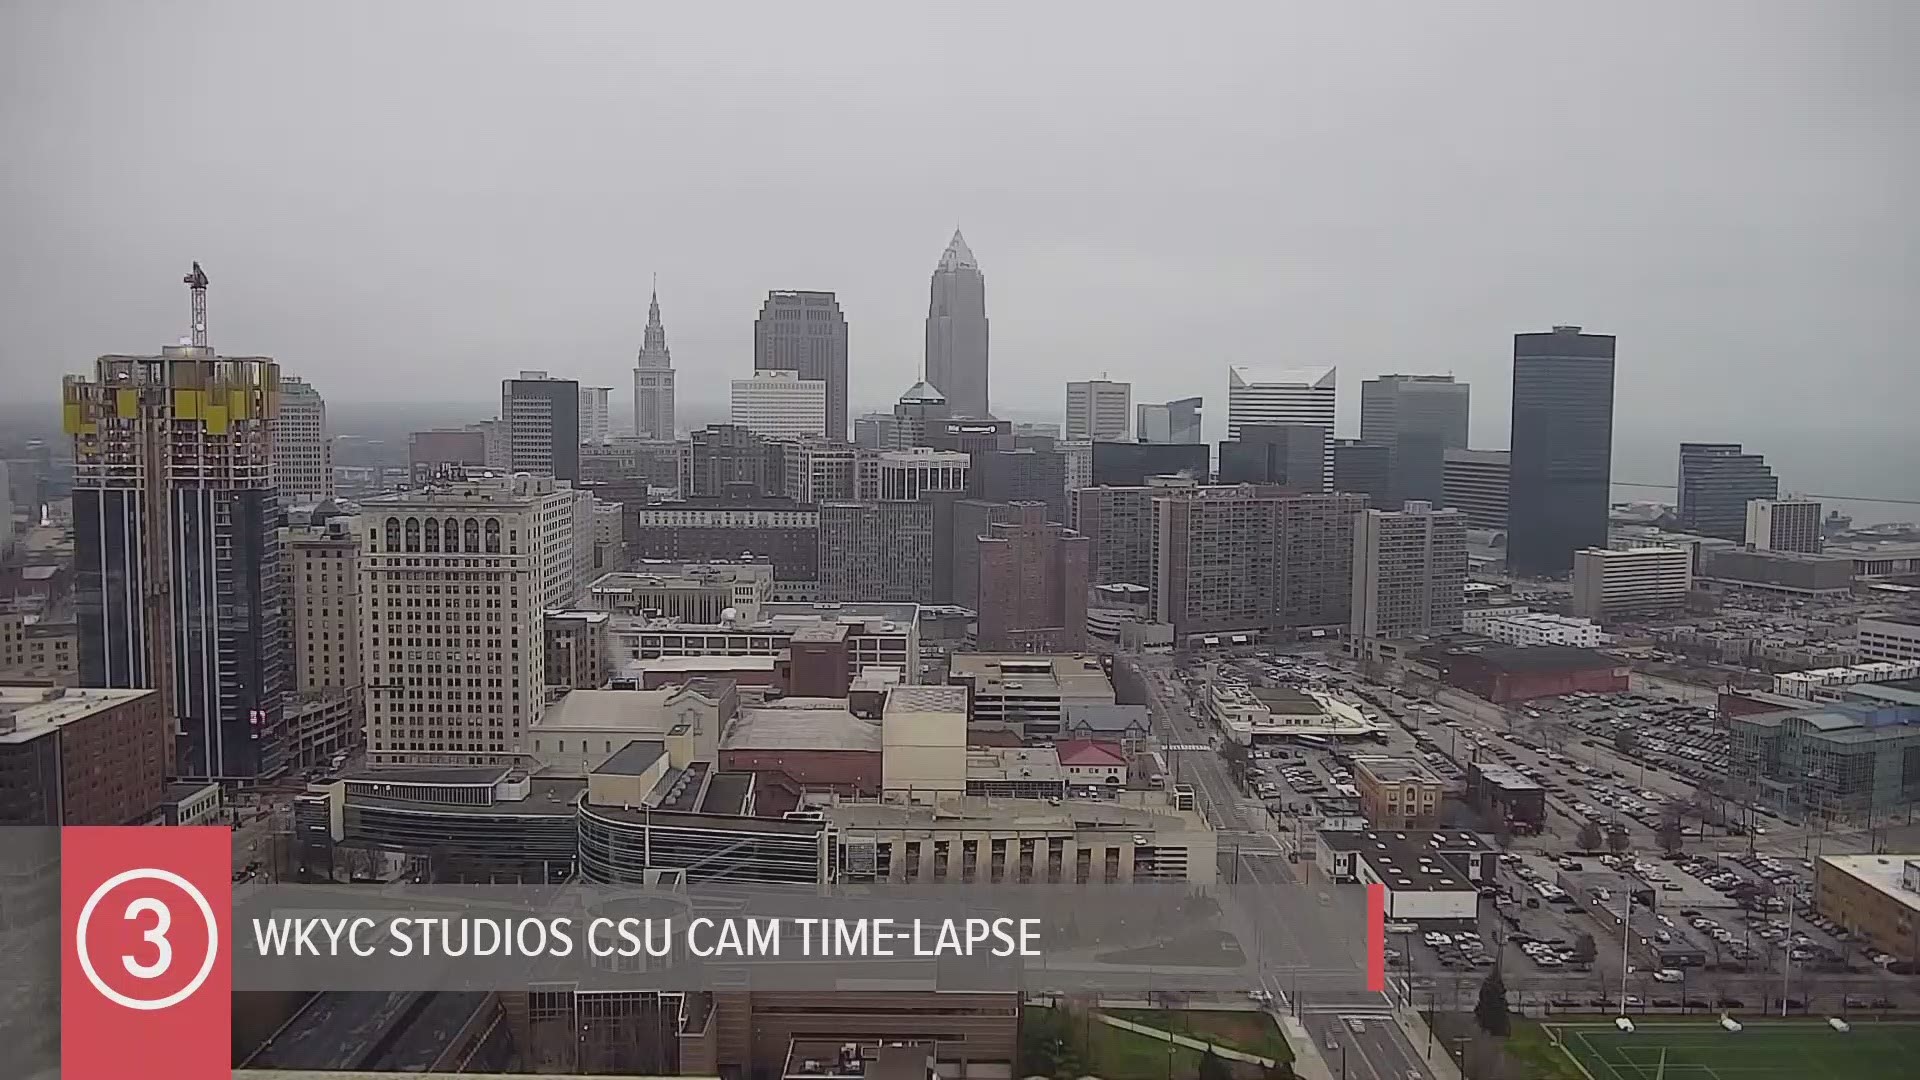 Yep, another cloudy day in Cleveland on Wednesday as seen on our all-day WKYC Studios CSU Cam time-lapse. Where is the sun??? #3weather